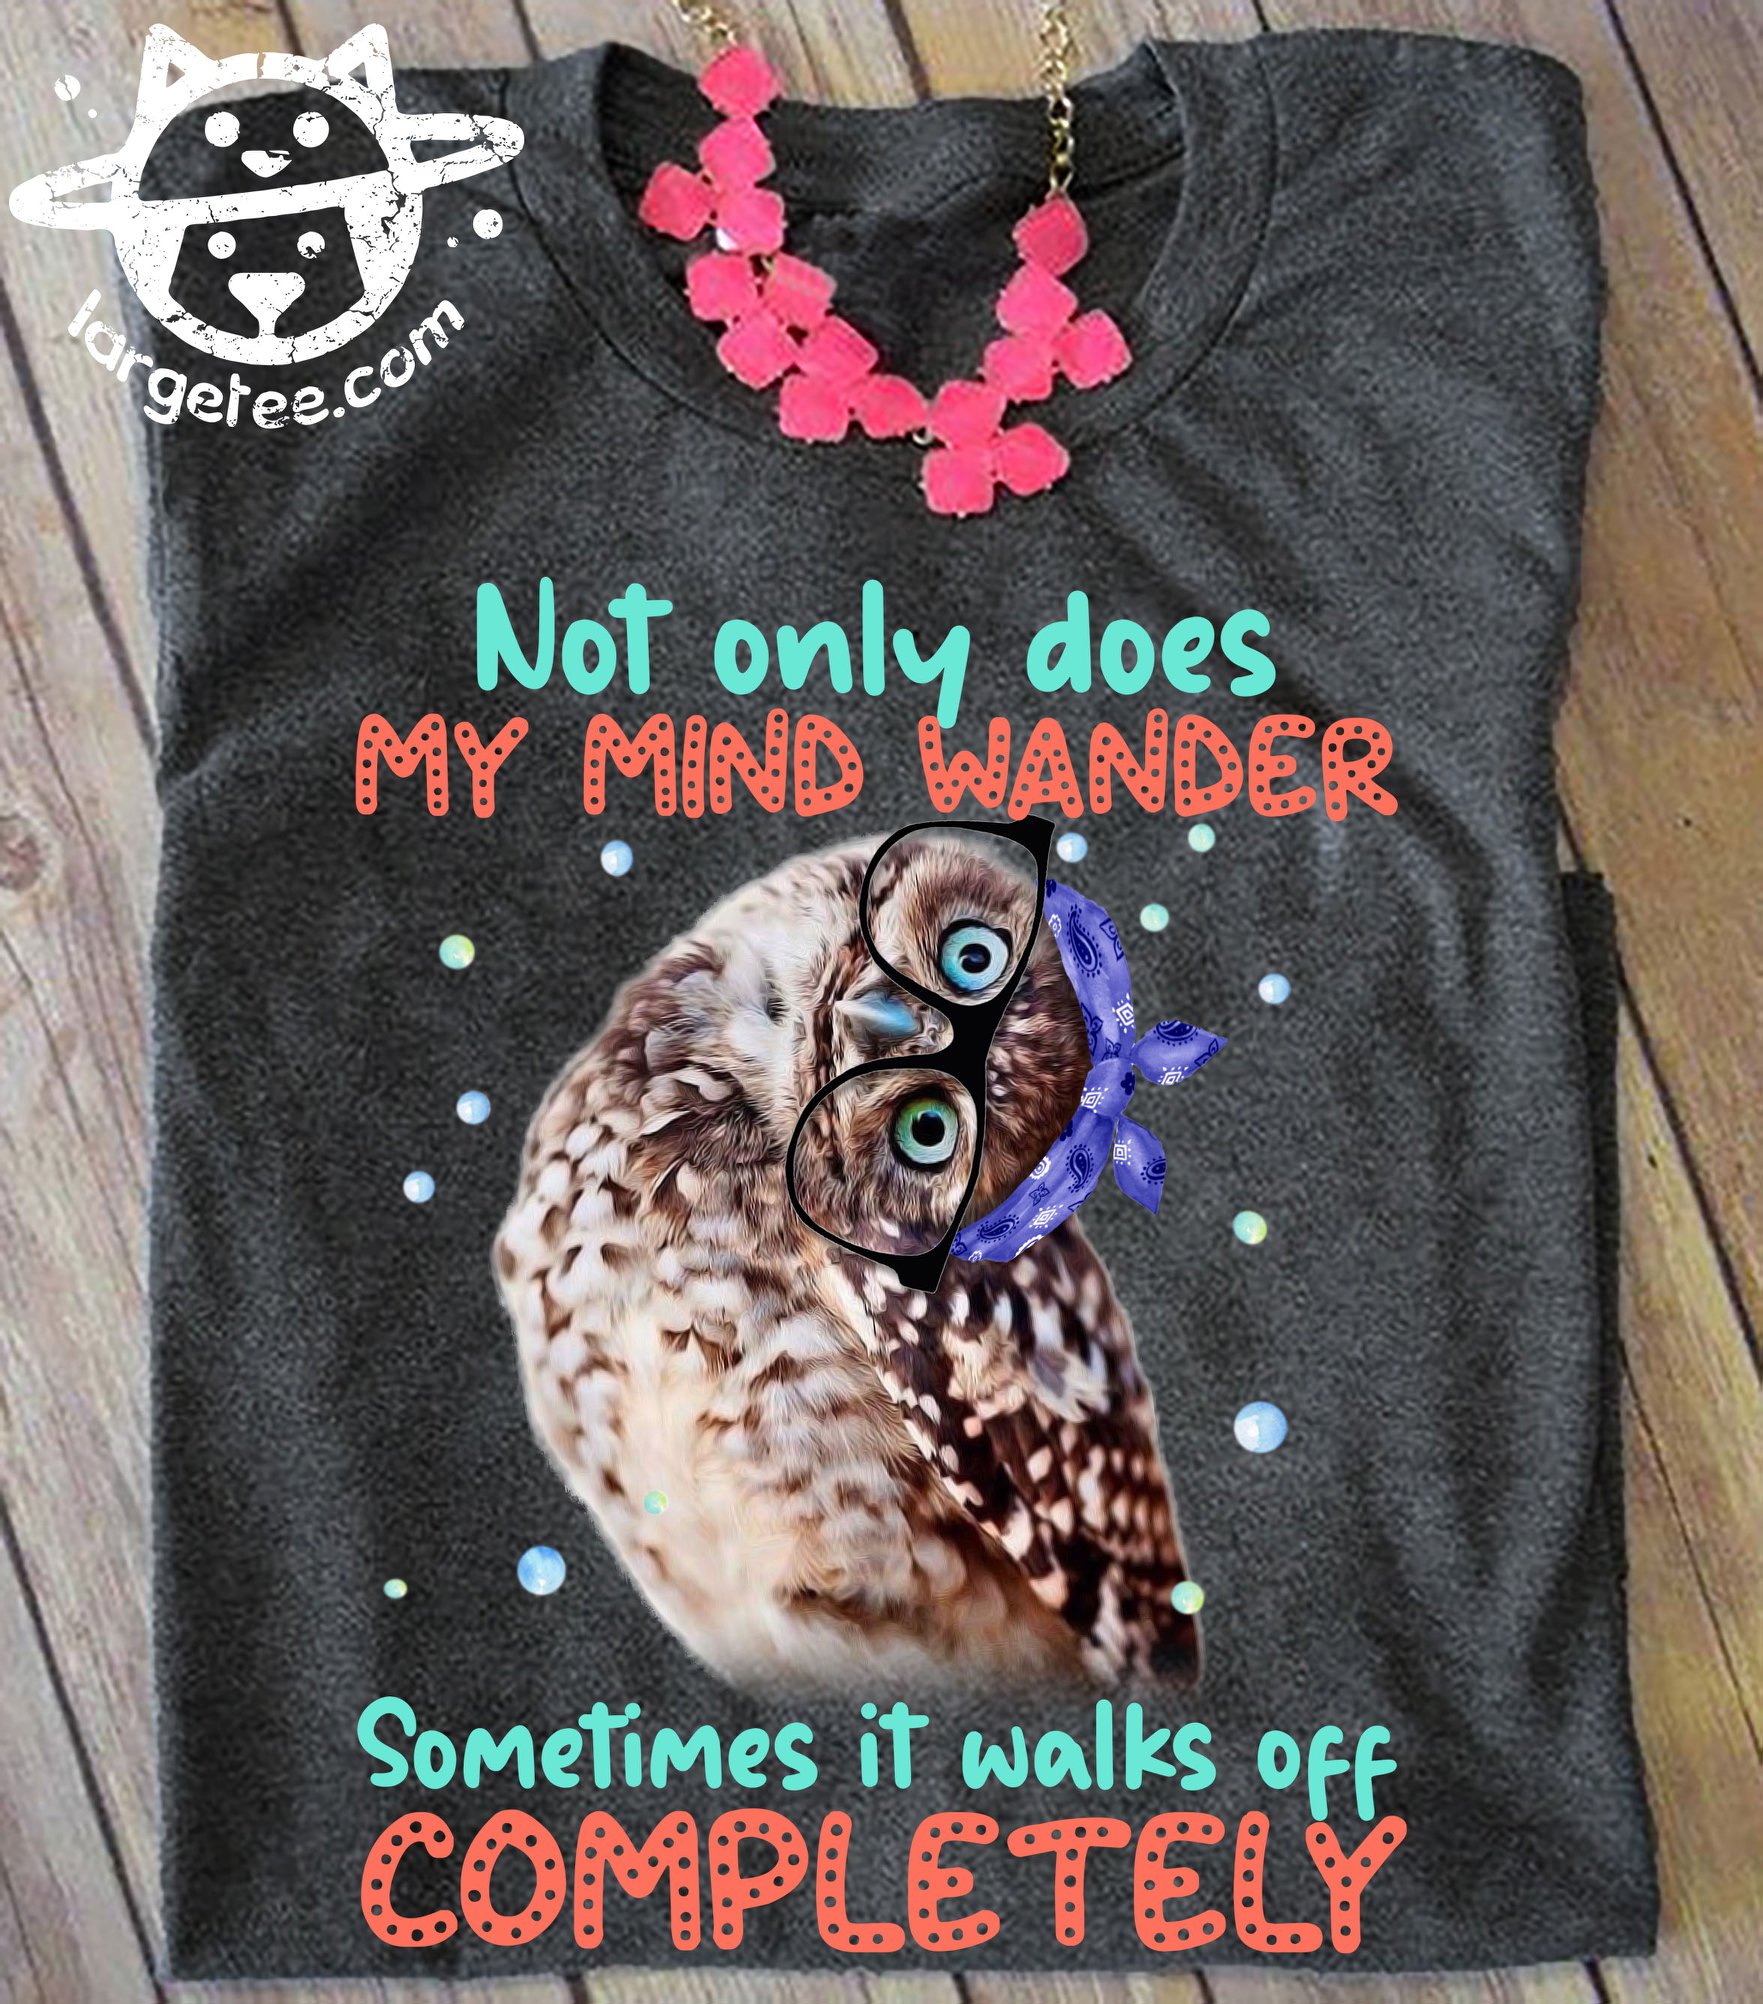 Not only does my mind wander sometimes it walks off completely - Grumpy owl